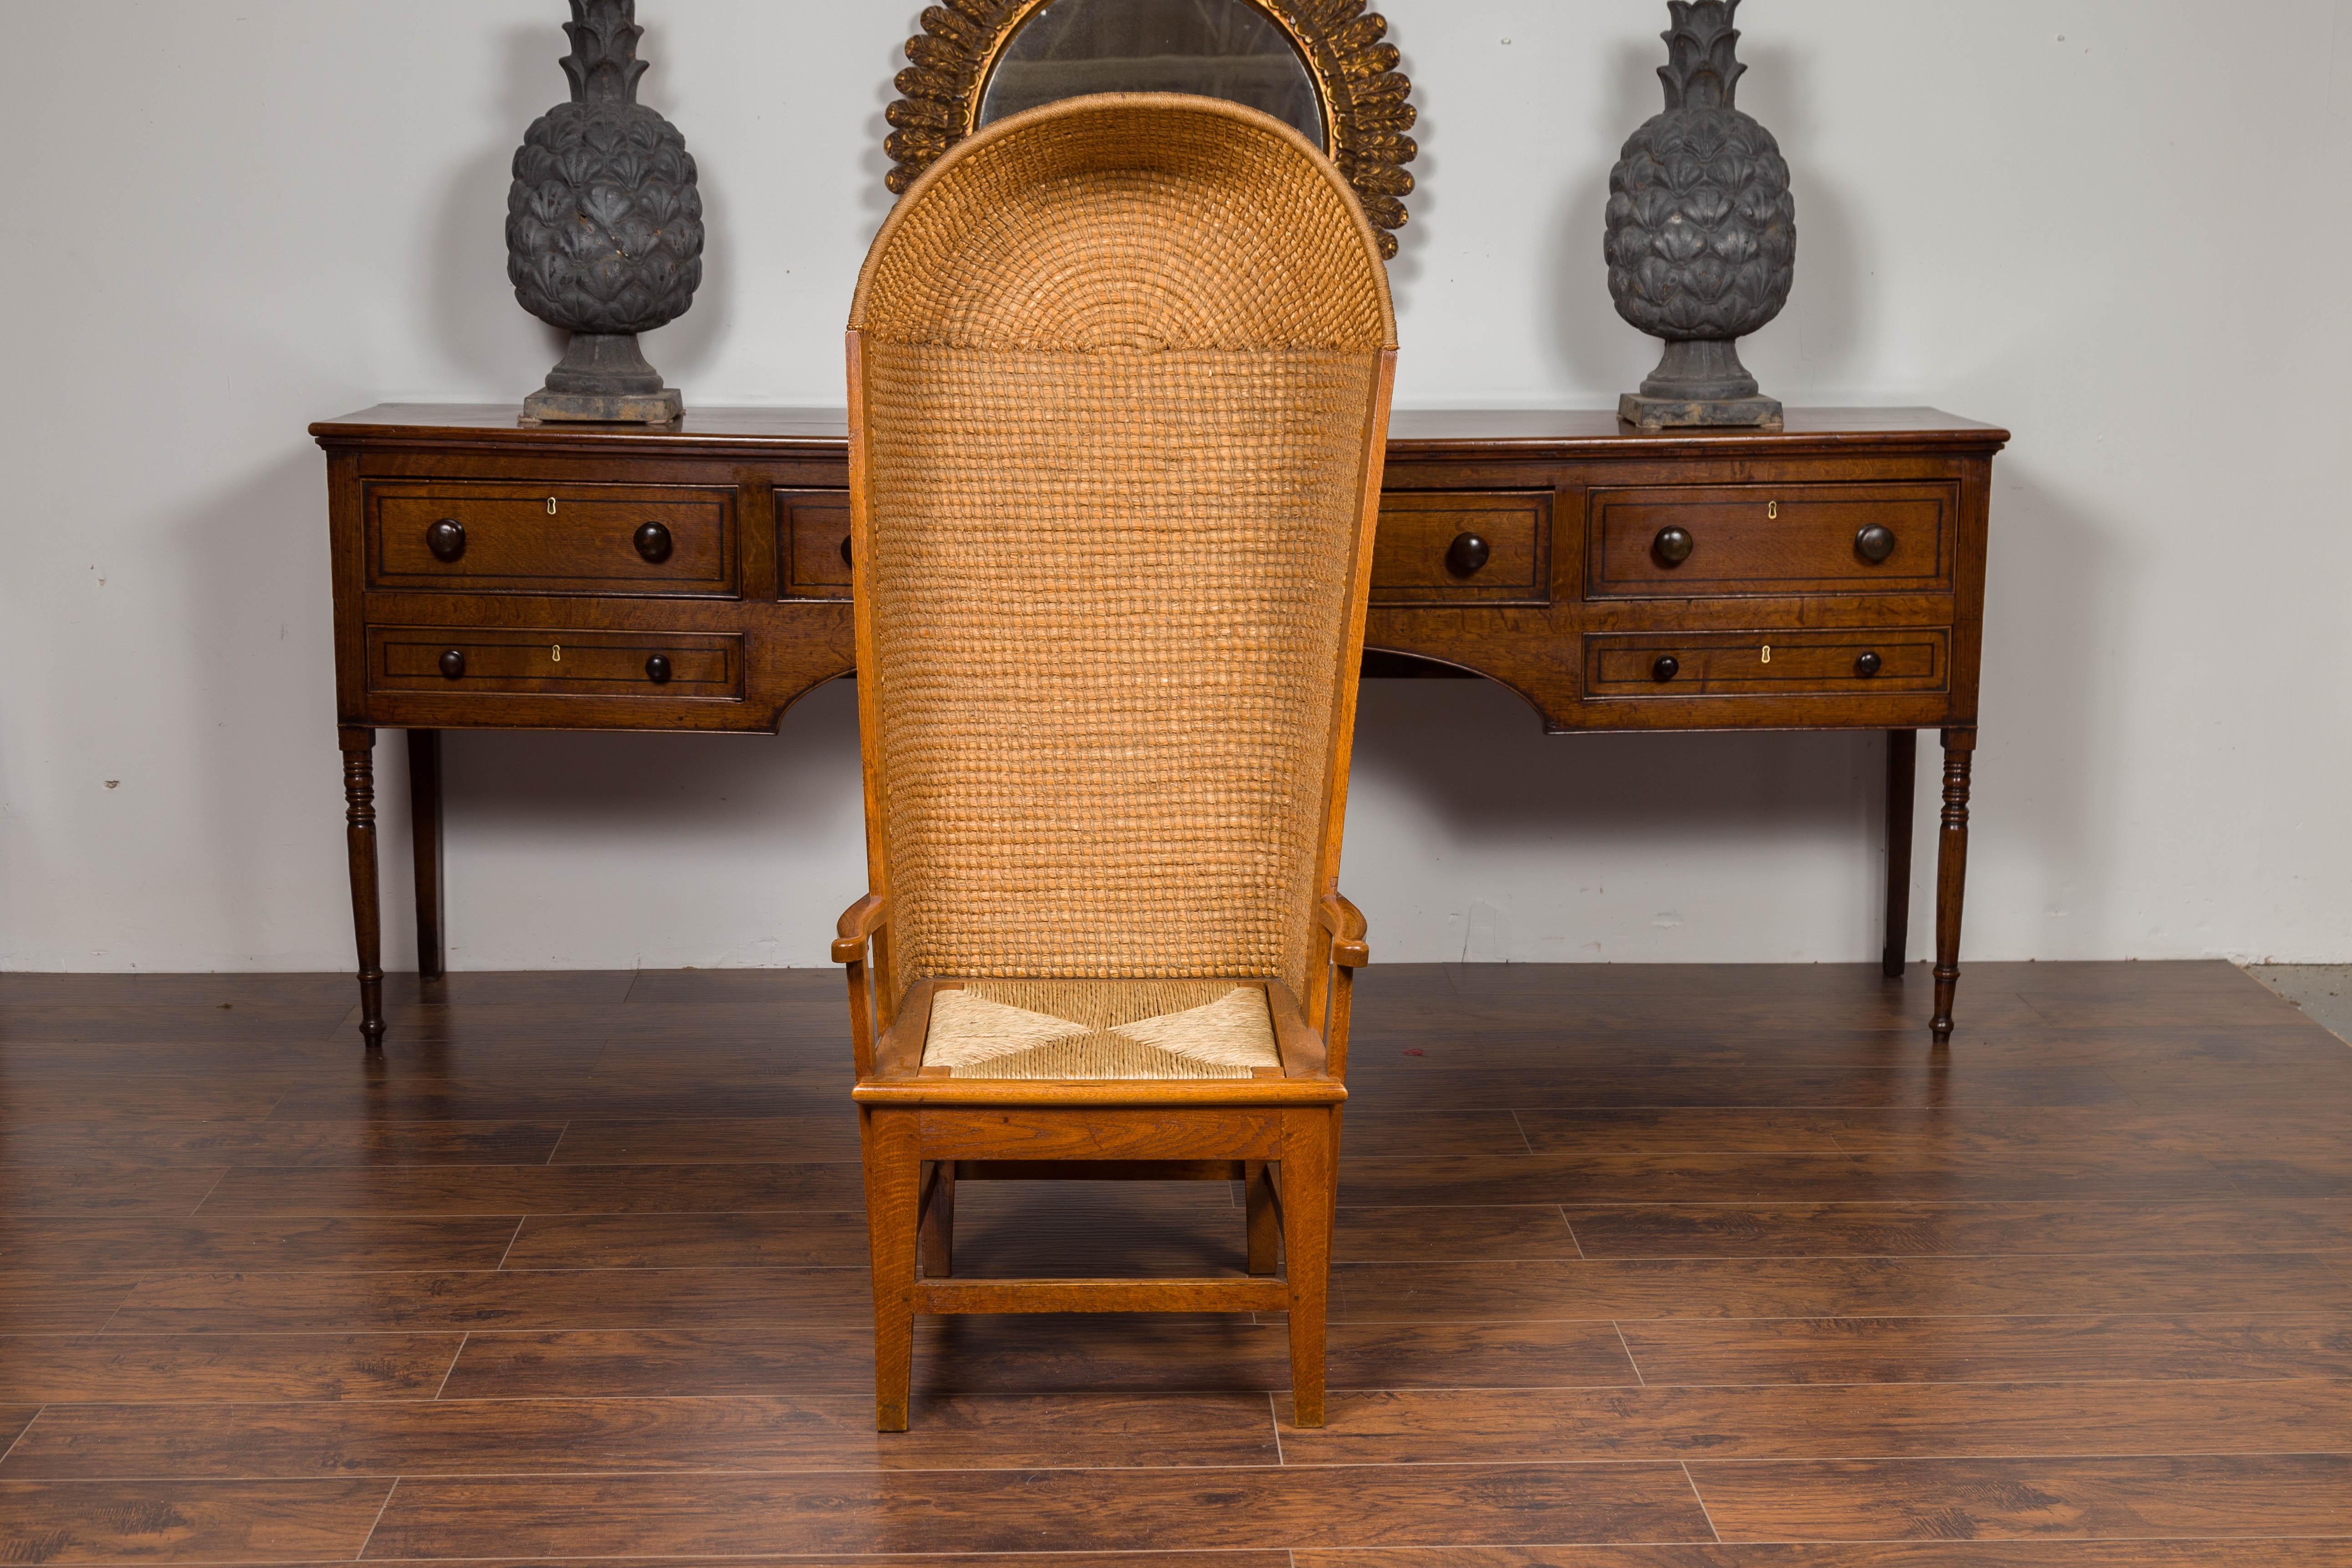 Scottish 1900s Orkney Island Canopy Chair with Hooded Handwoven Straw Back For Sale 3